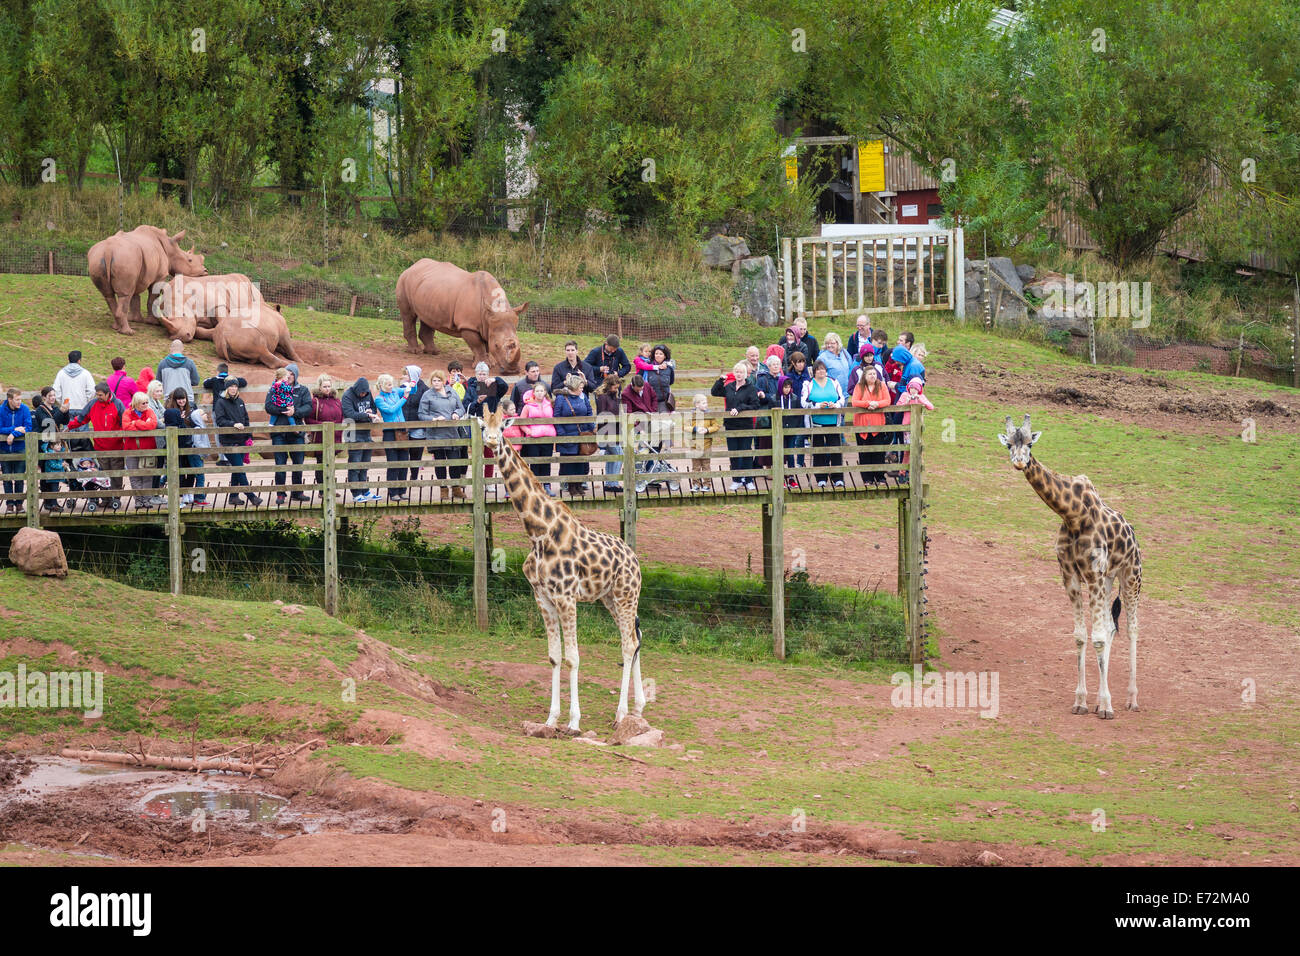 Visitors to South Lakes Animal Park in the Giraffe Enclosure Stock Photo